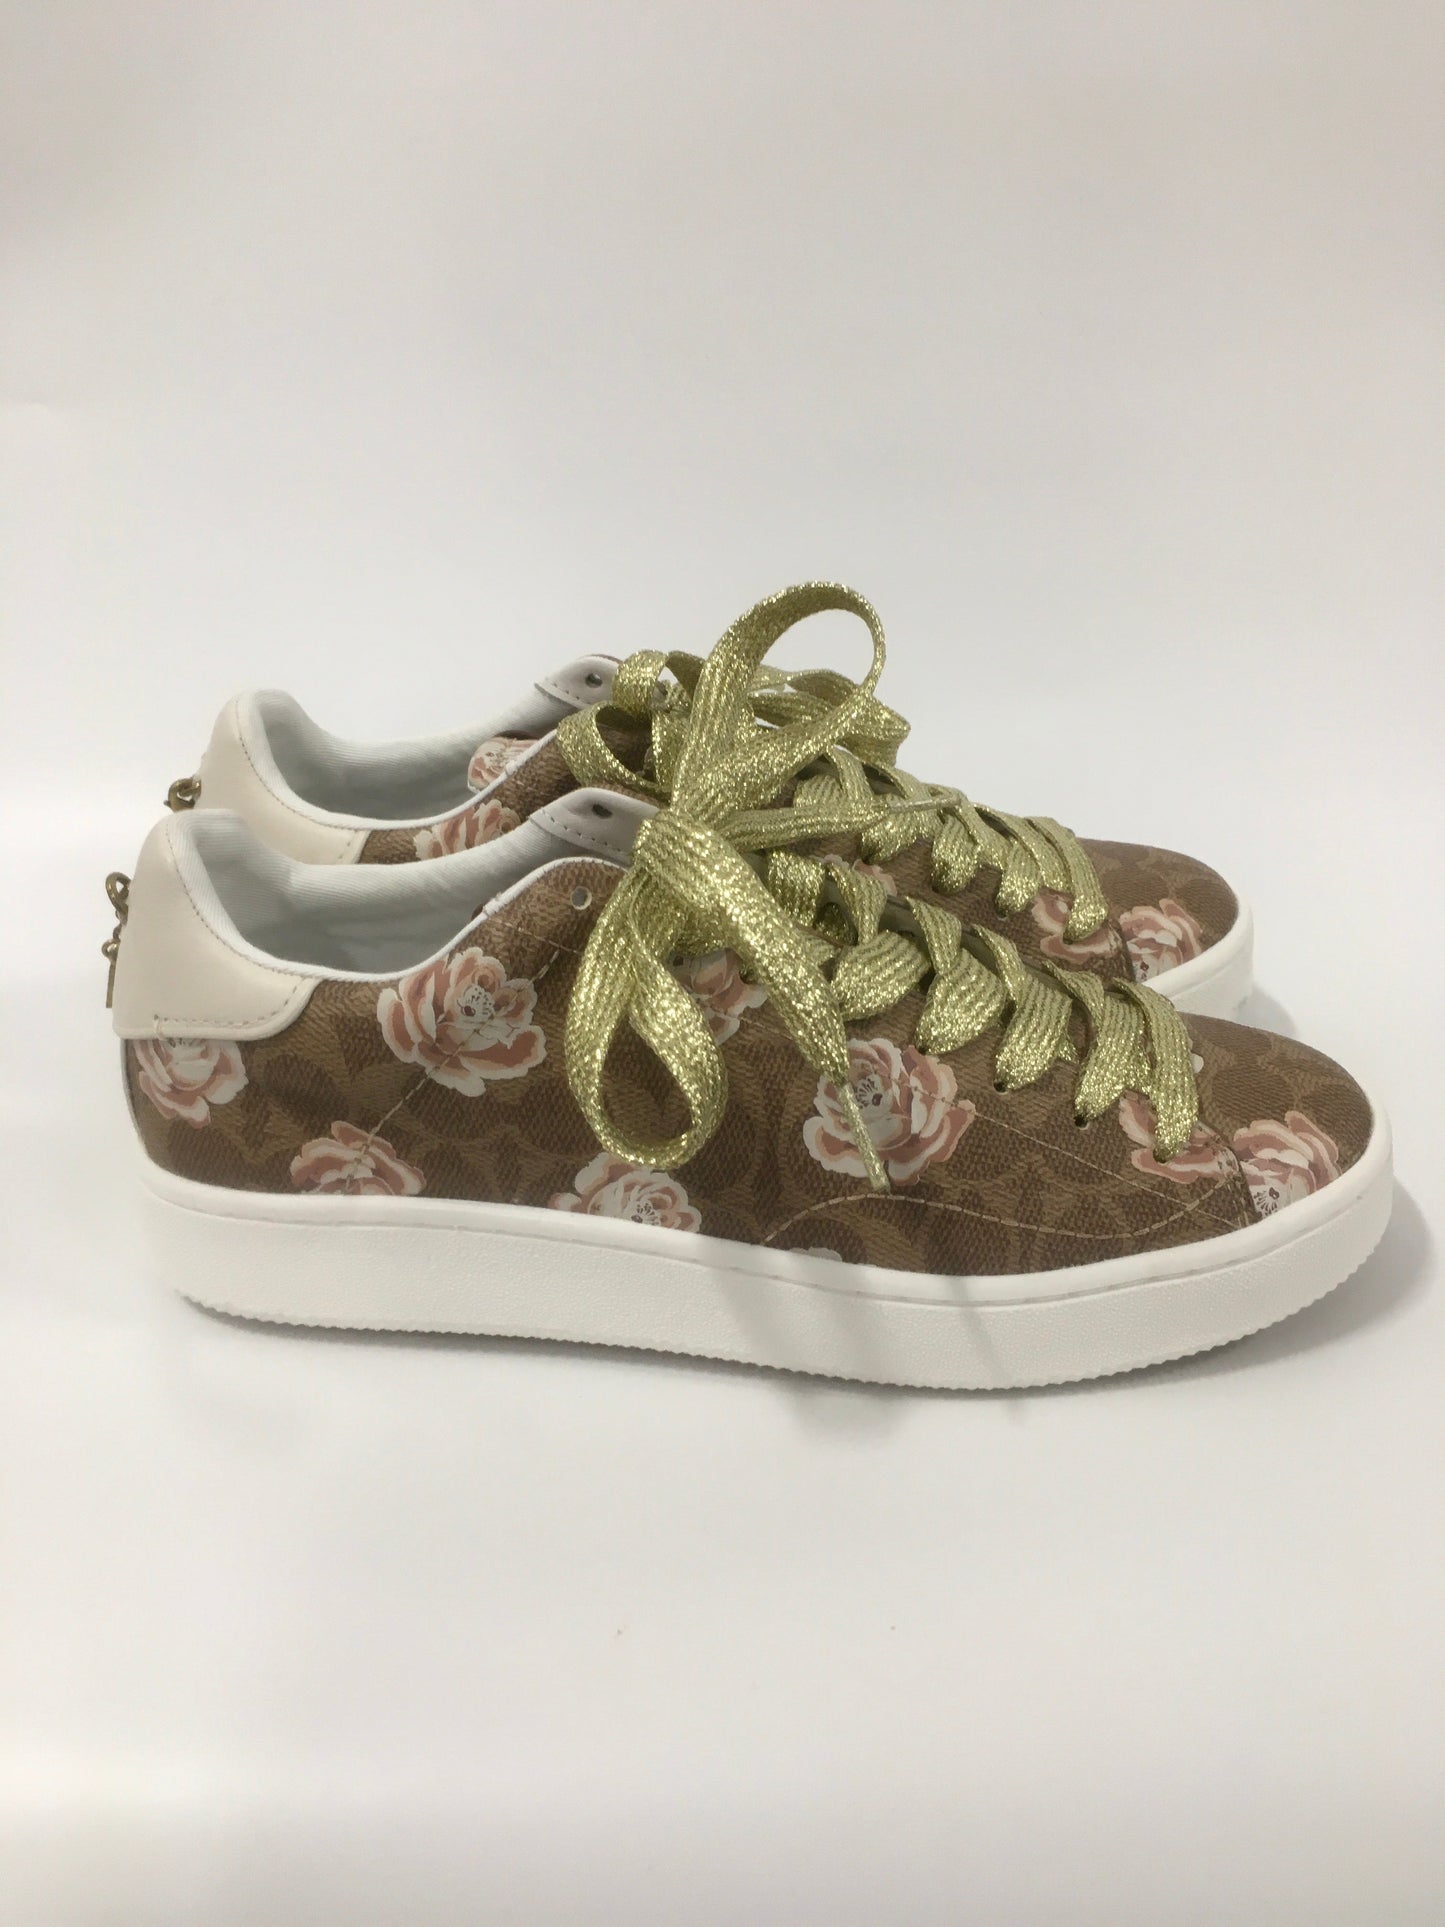 Floral Print Shoes Sneakers Coach, Size 10